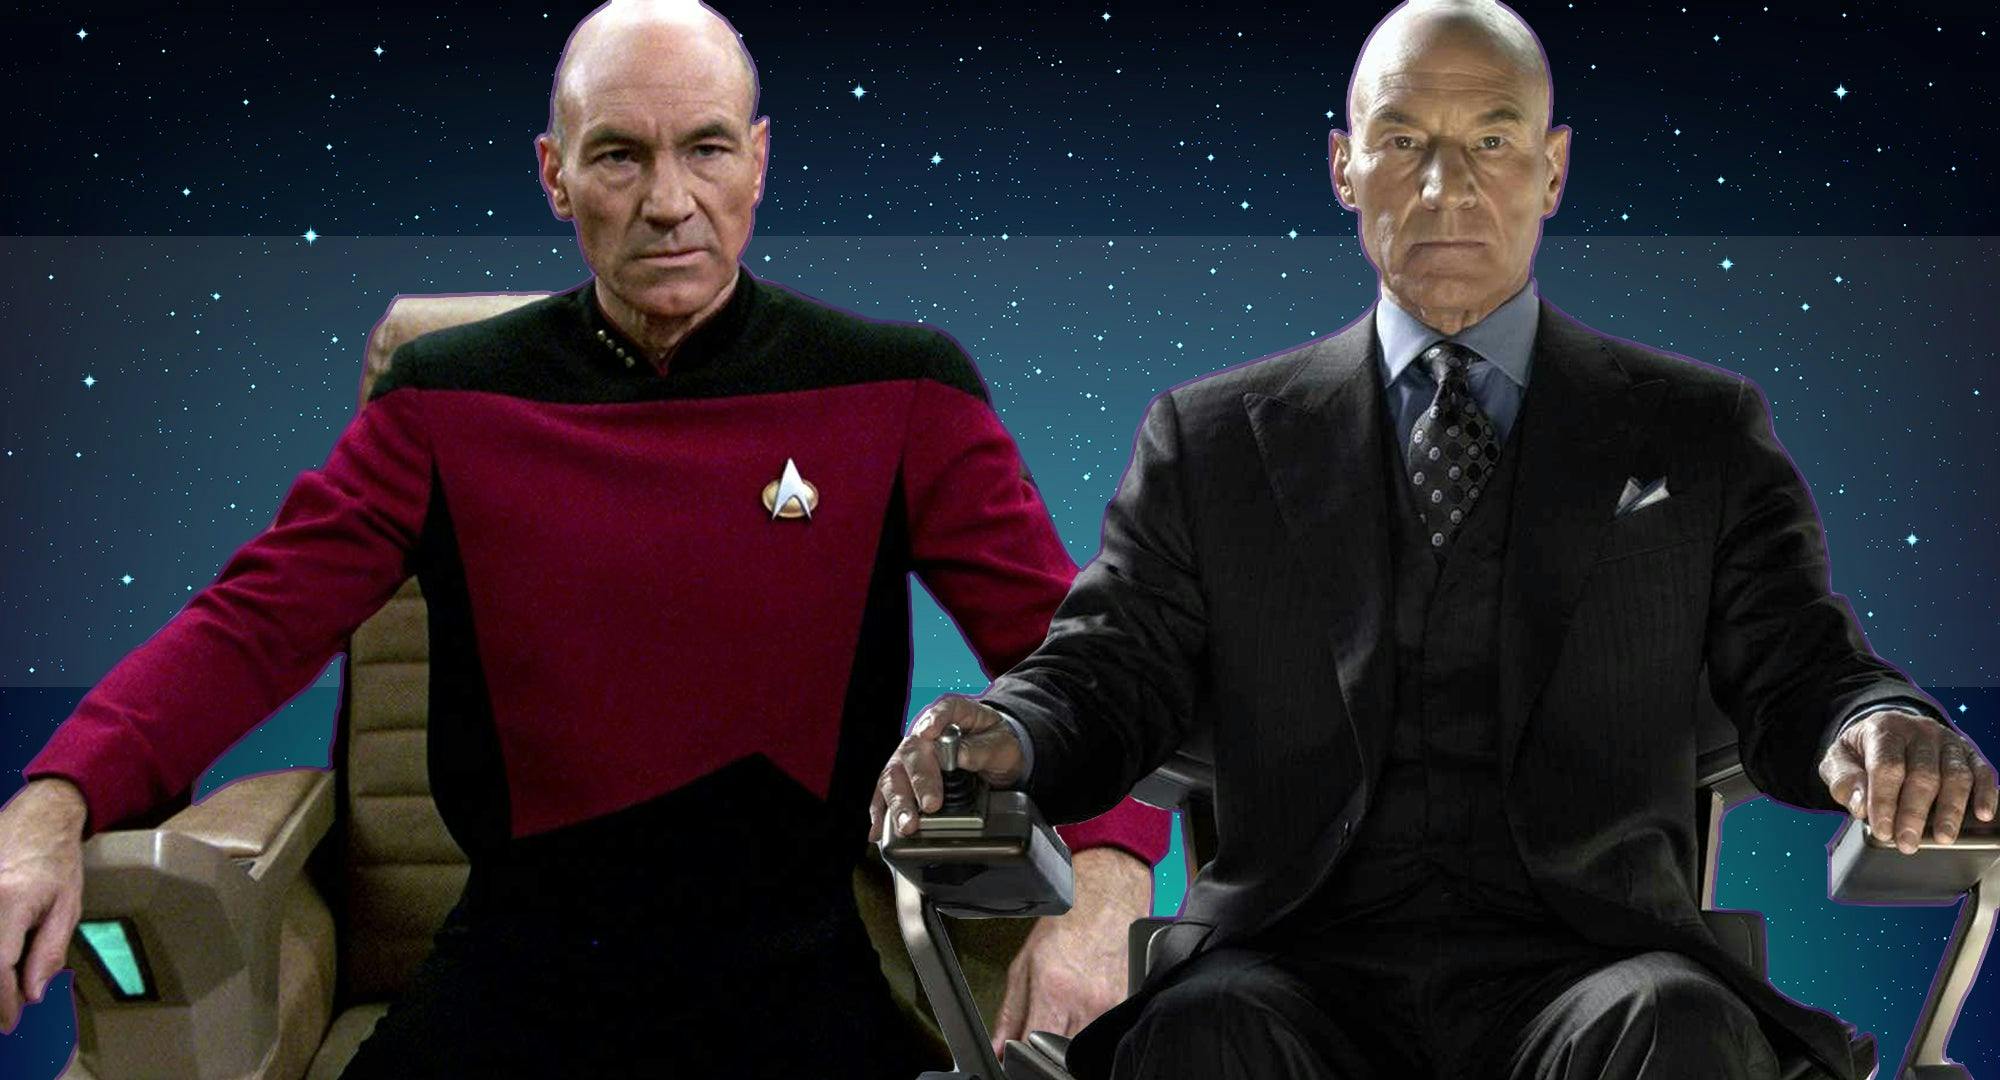 Picard and xAVIER